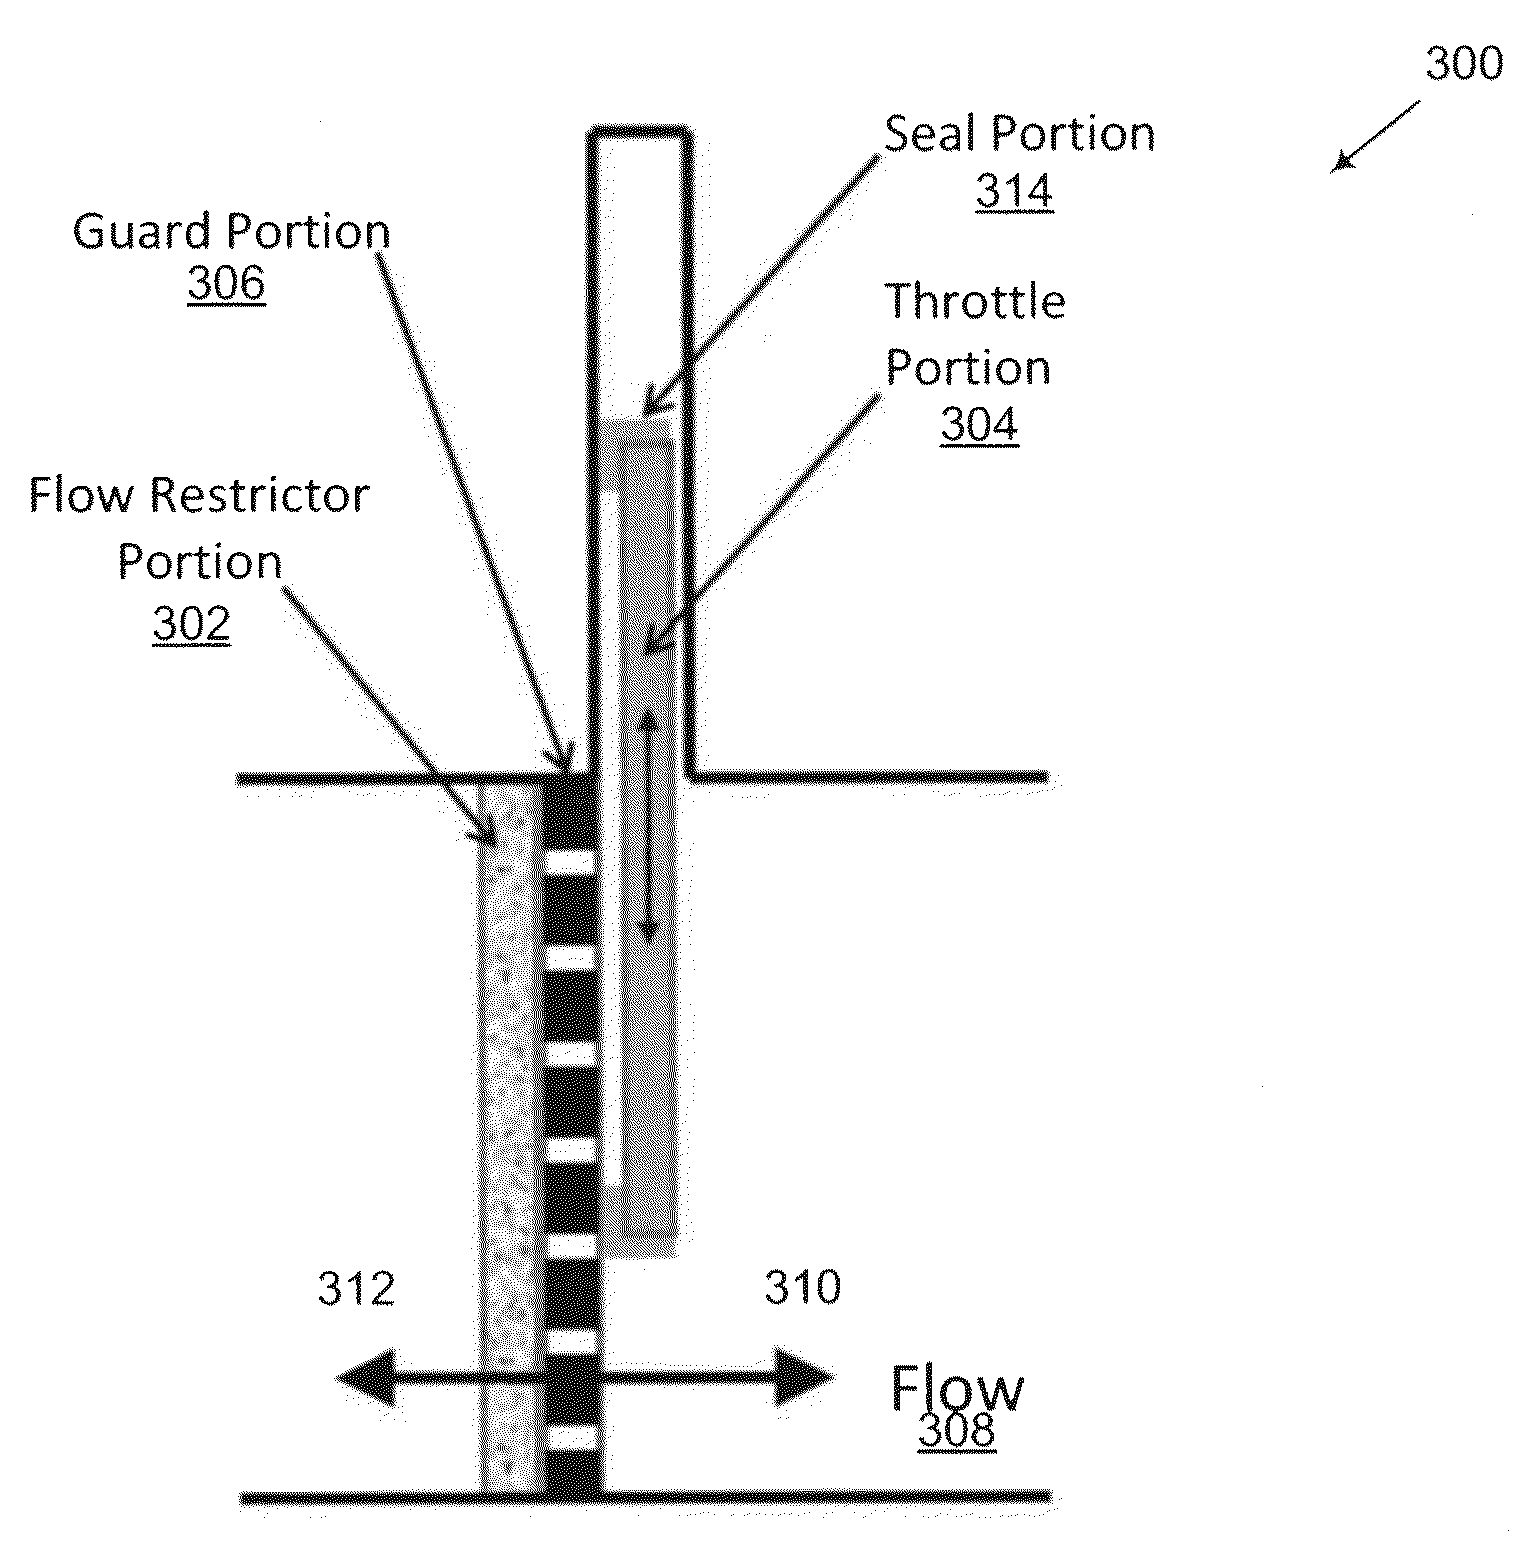 Systems and Methods for a Control Valve